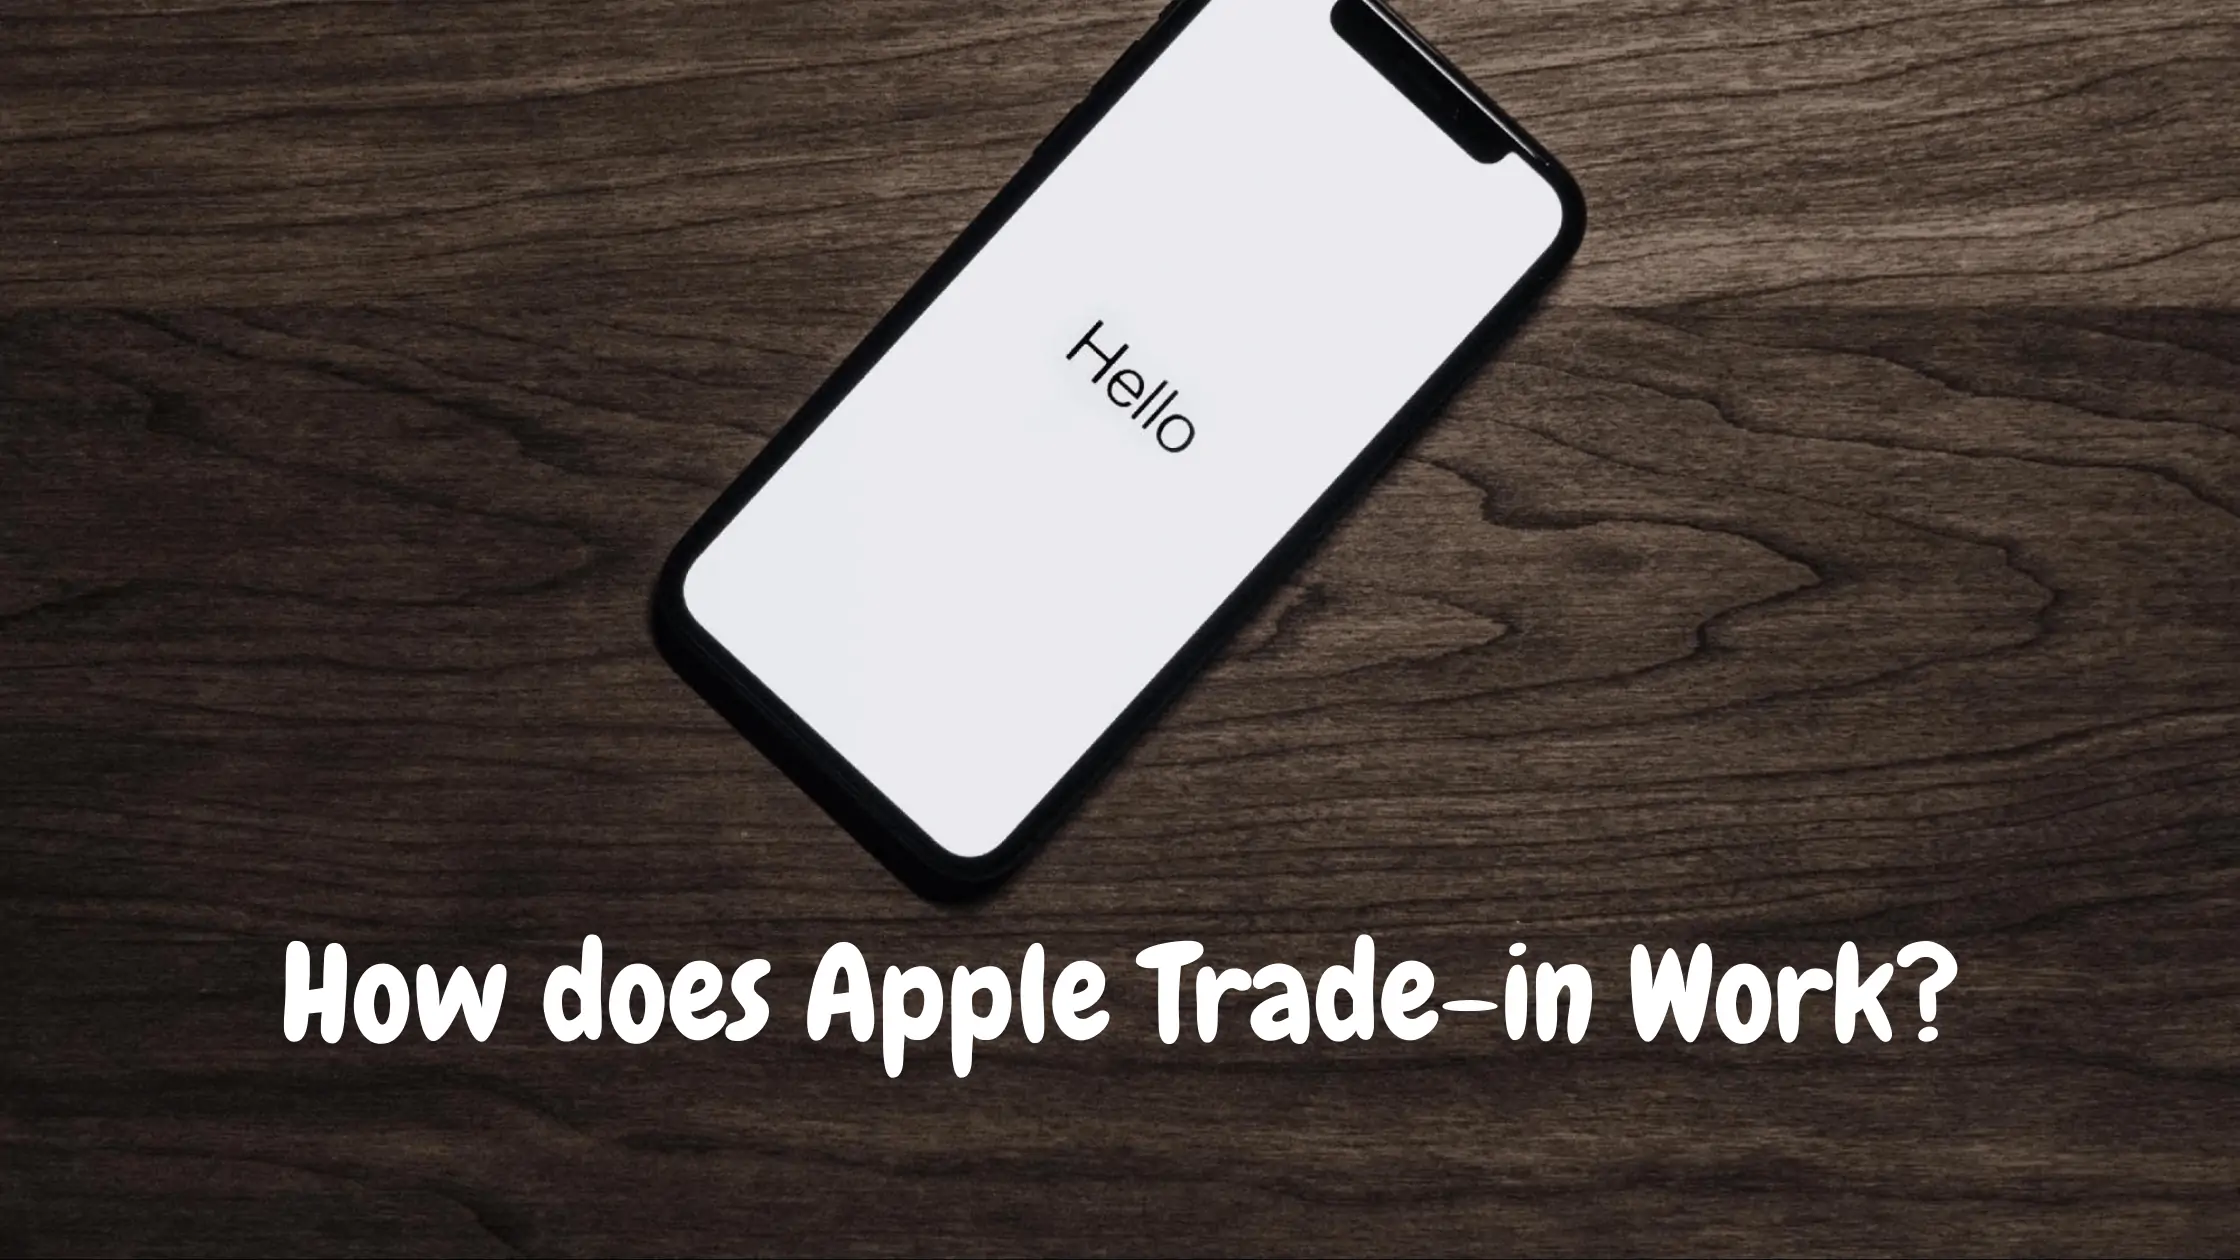 How does Apple Trade-in Work